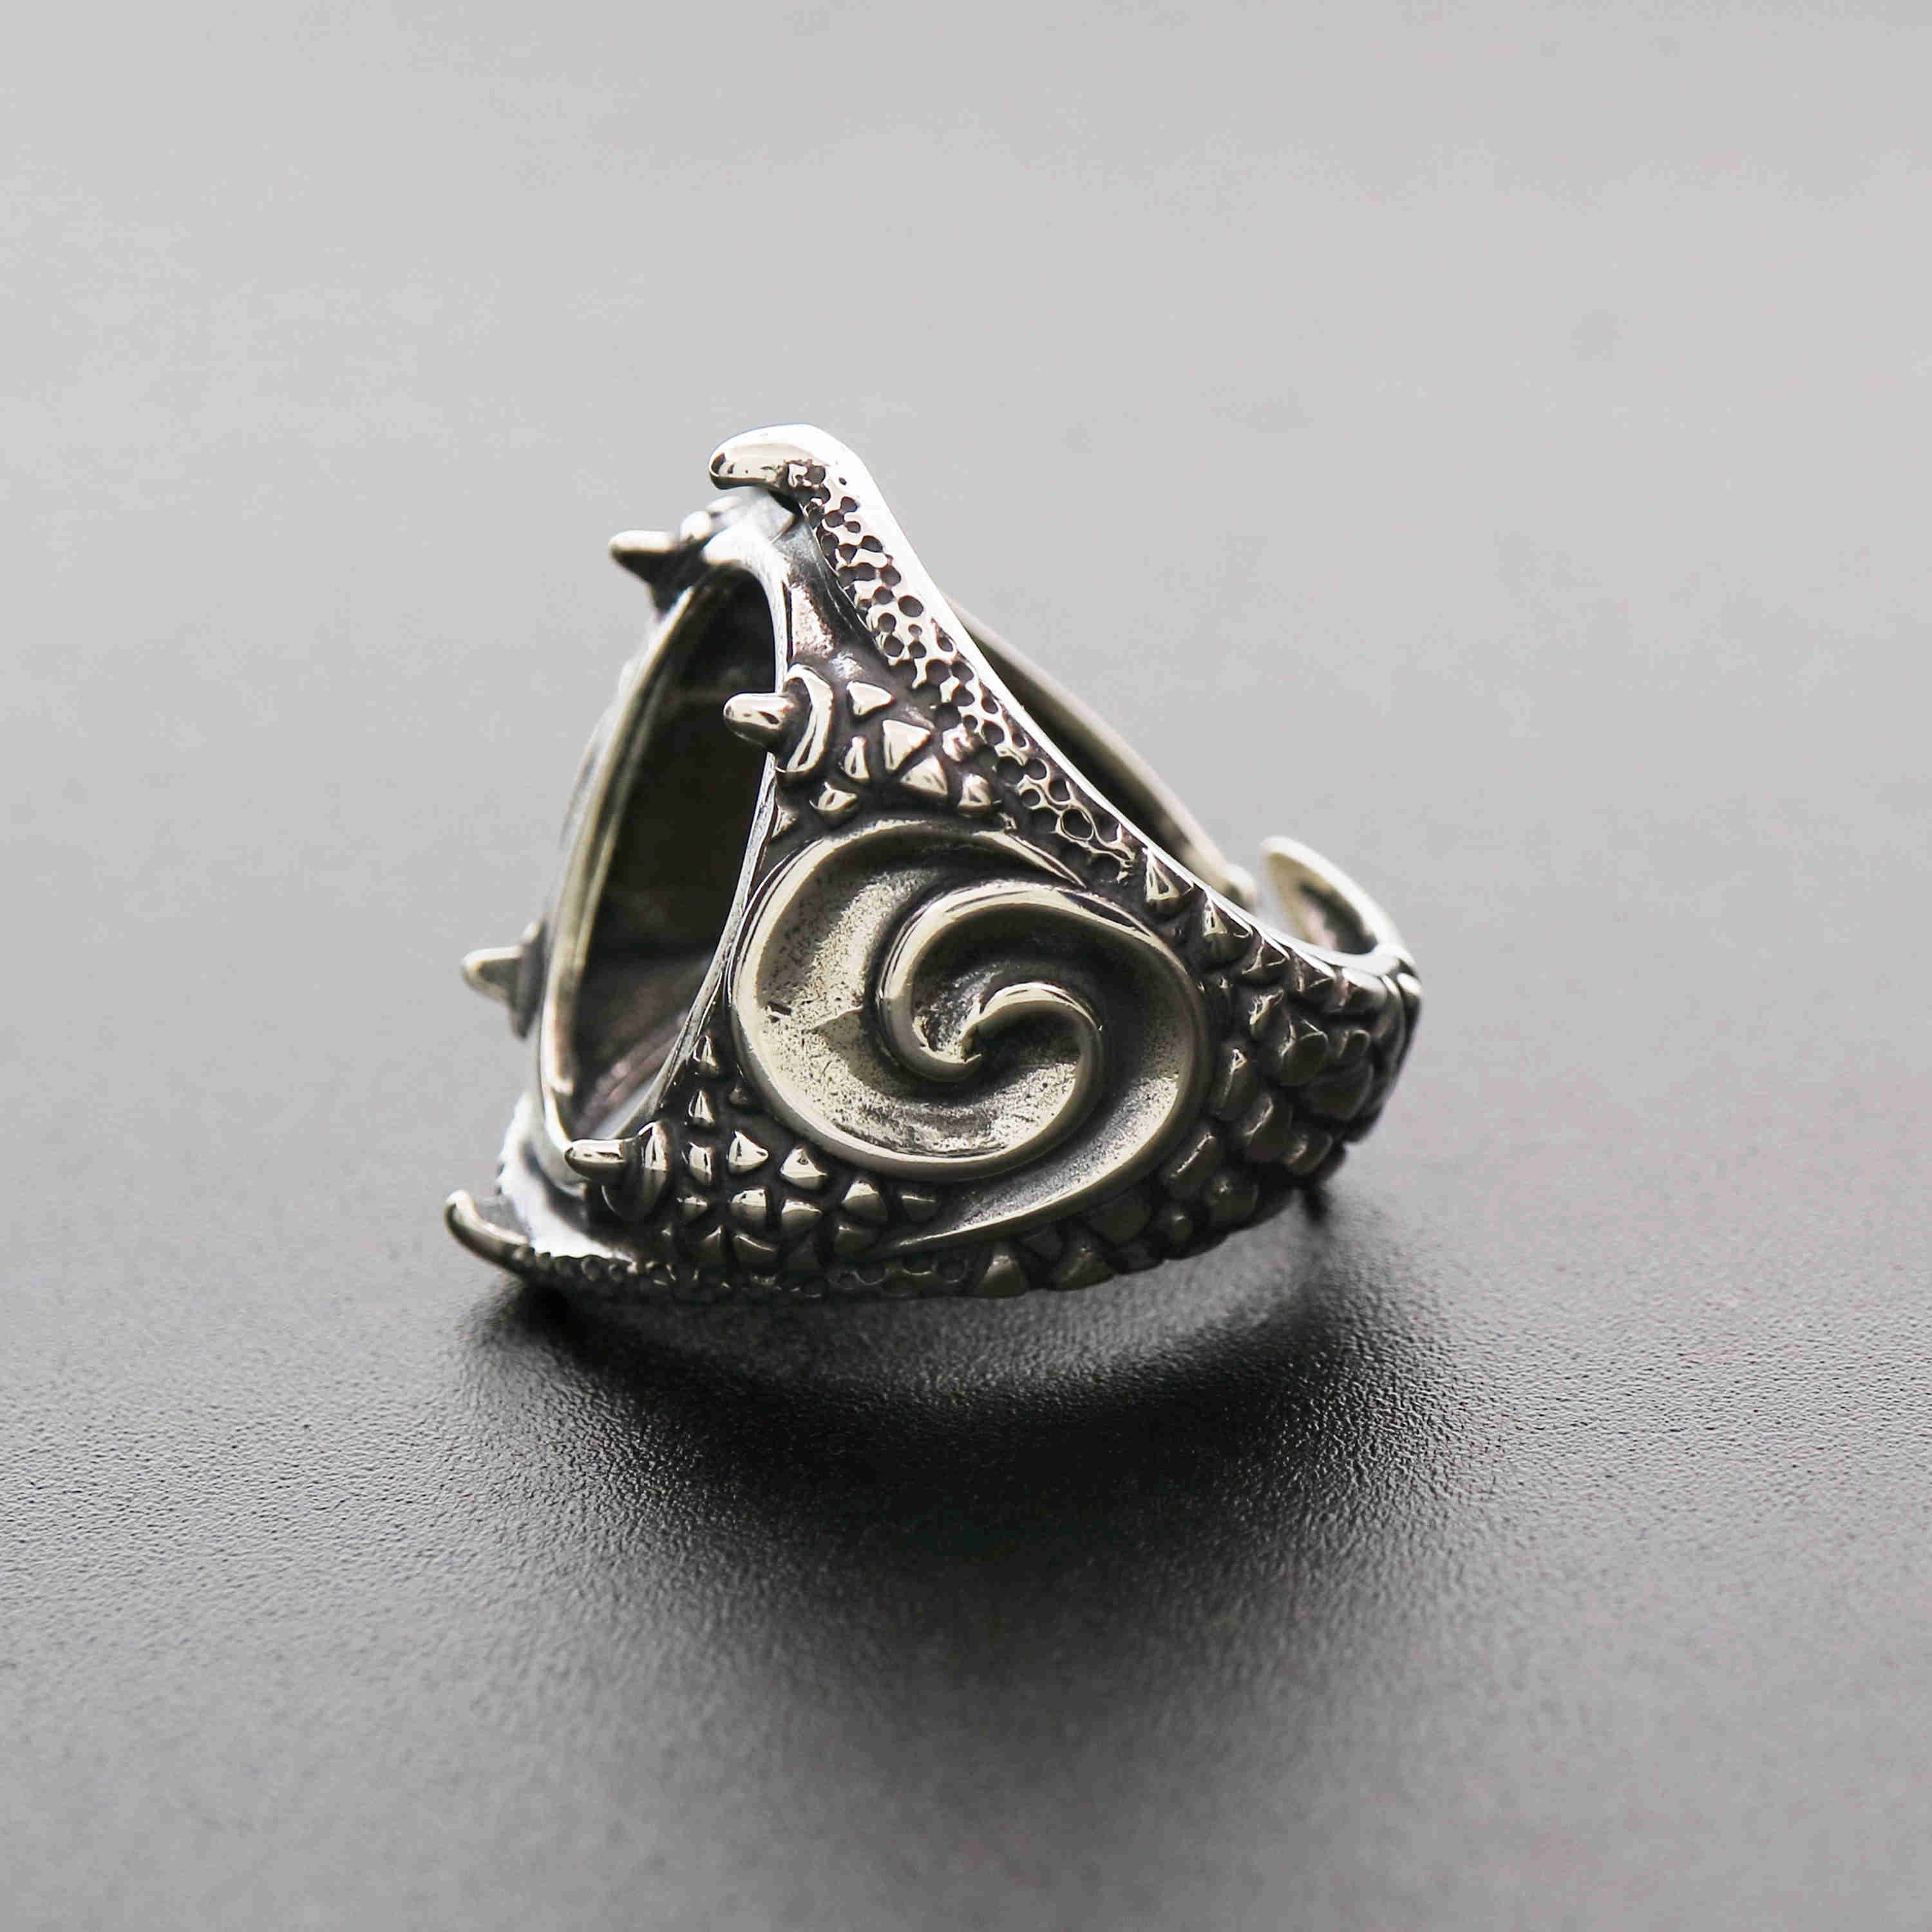 1Pcs 15X20MM Oval Cabochon Bezel Steam Punk Dragon Claw Heavy Antiqued Solid 925 Sterling Silver Adjustable Ring Settings 1223091 - Click Image to Close